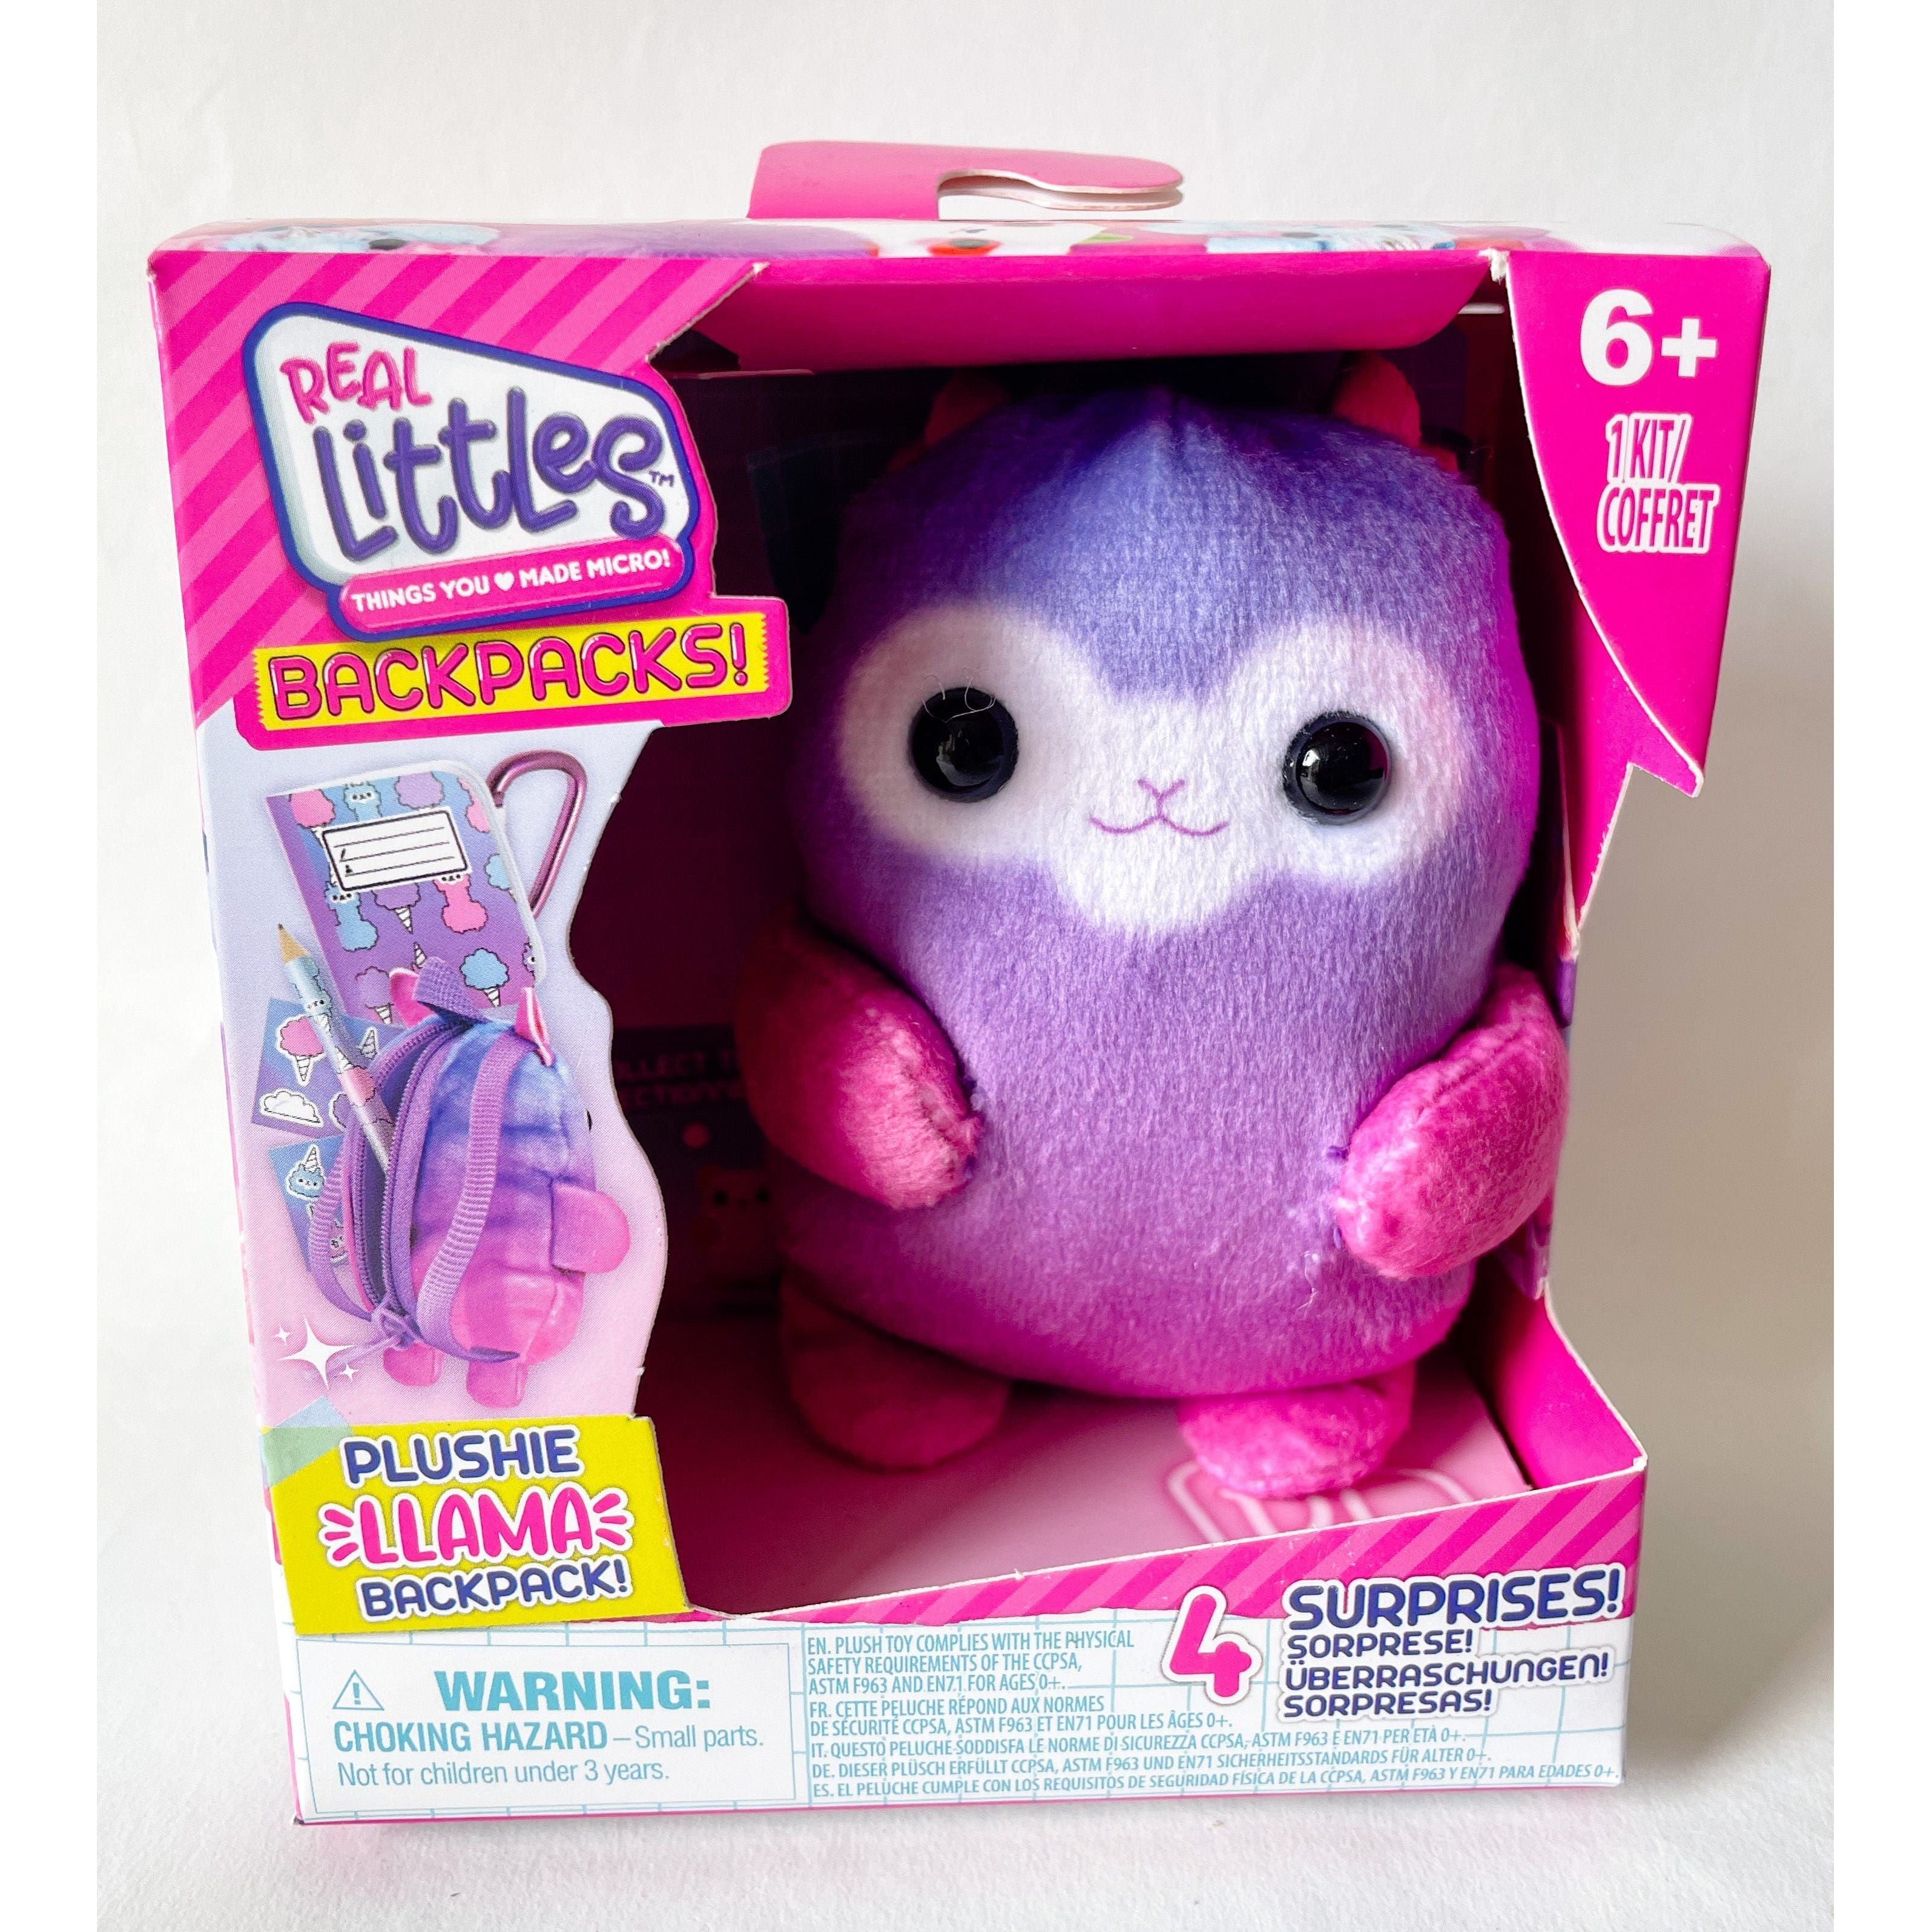 Let's open a Real Littles Backpacks Plushie Pet and see what's